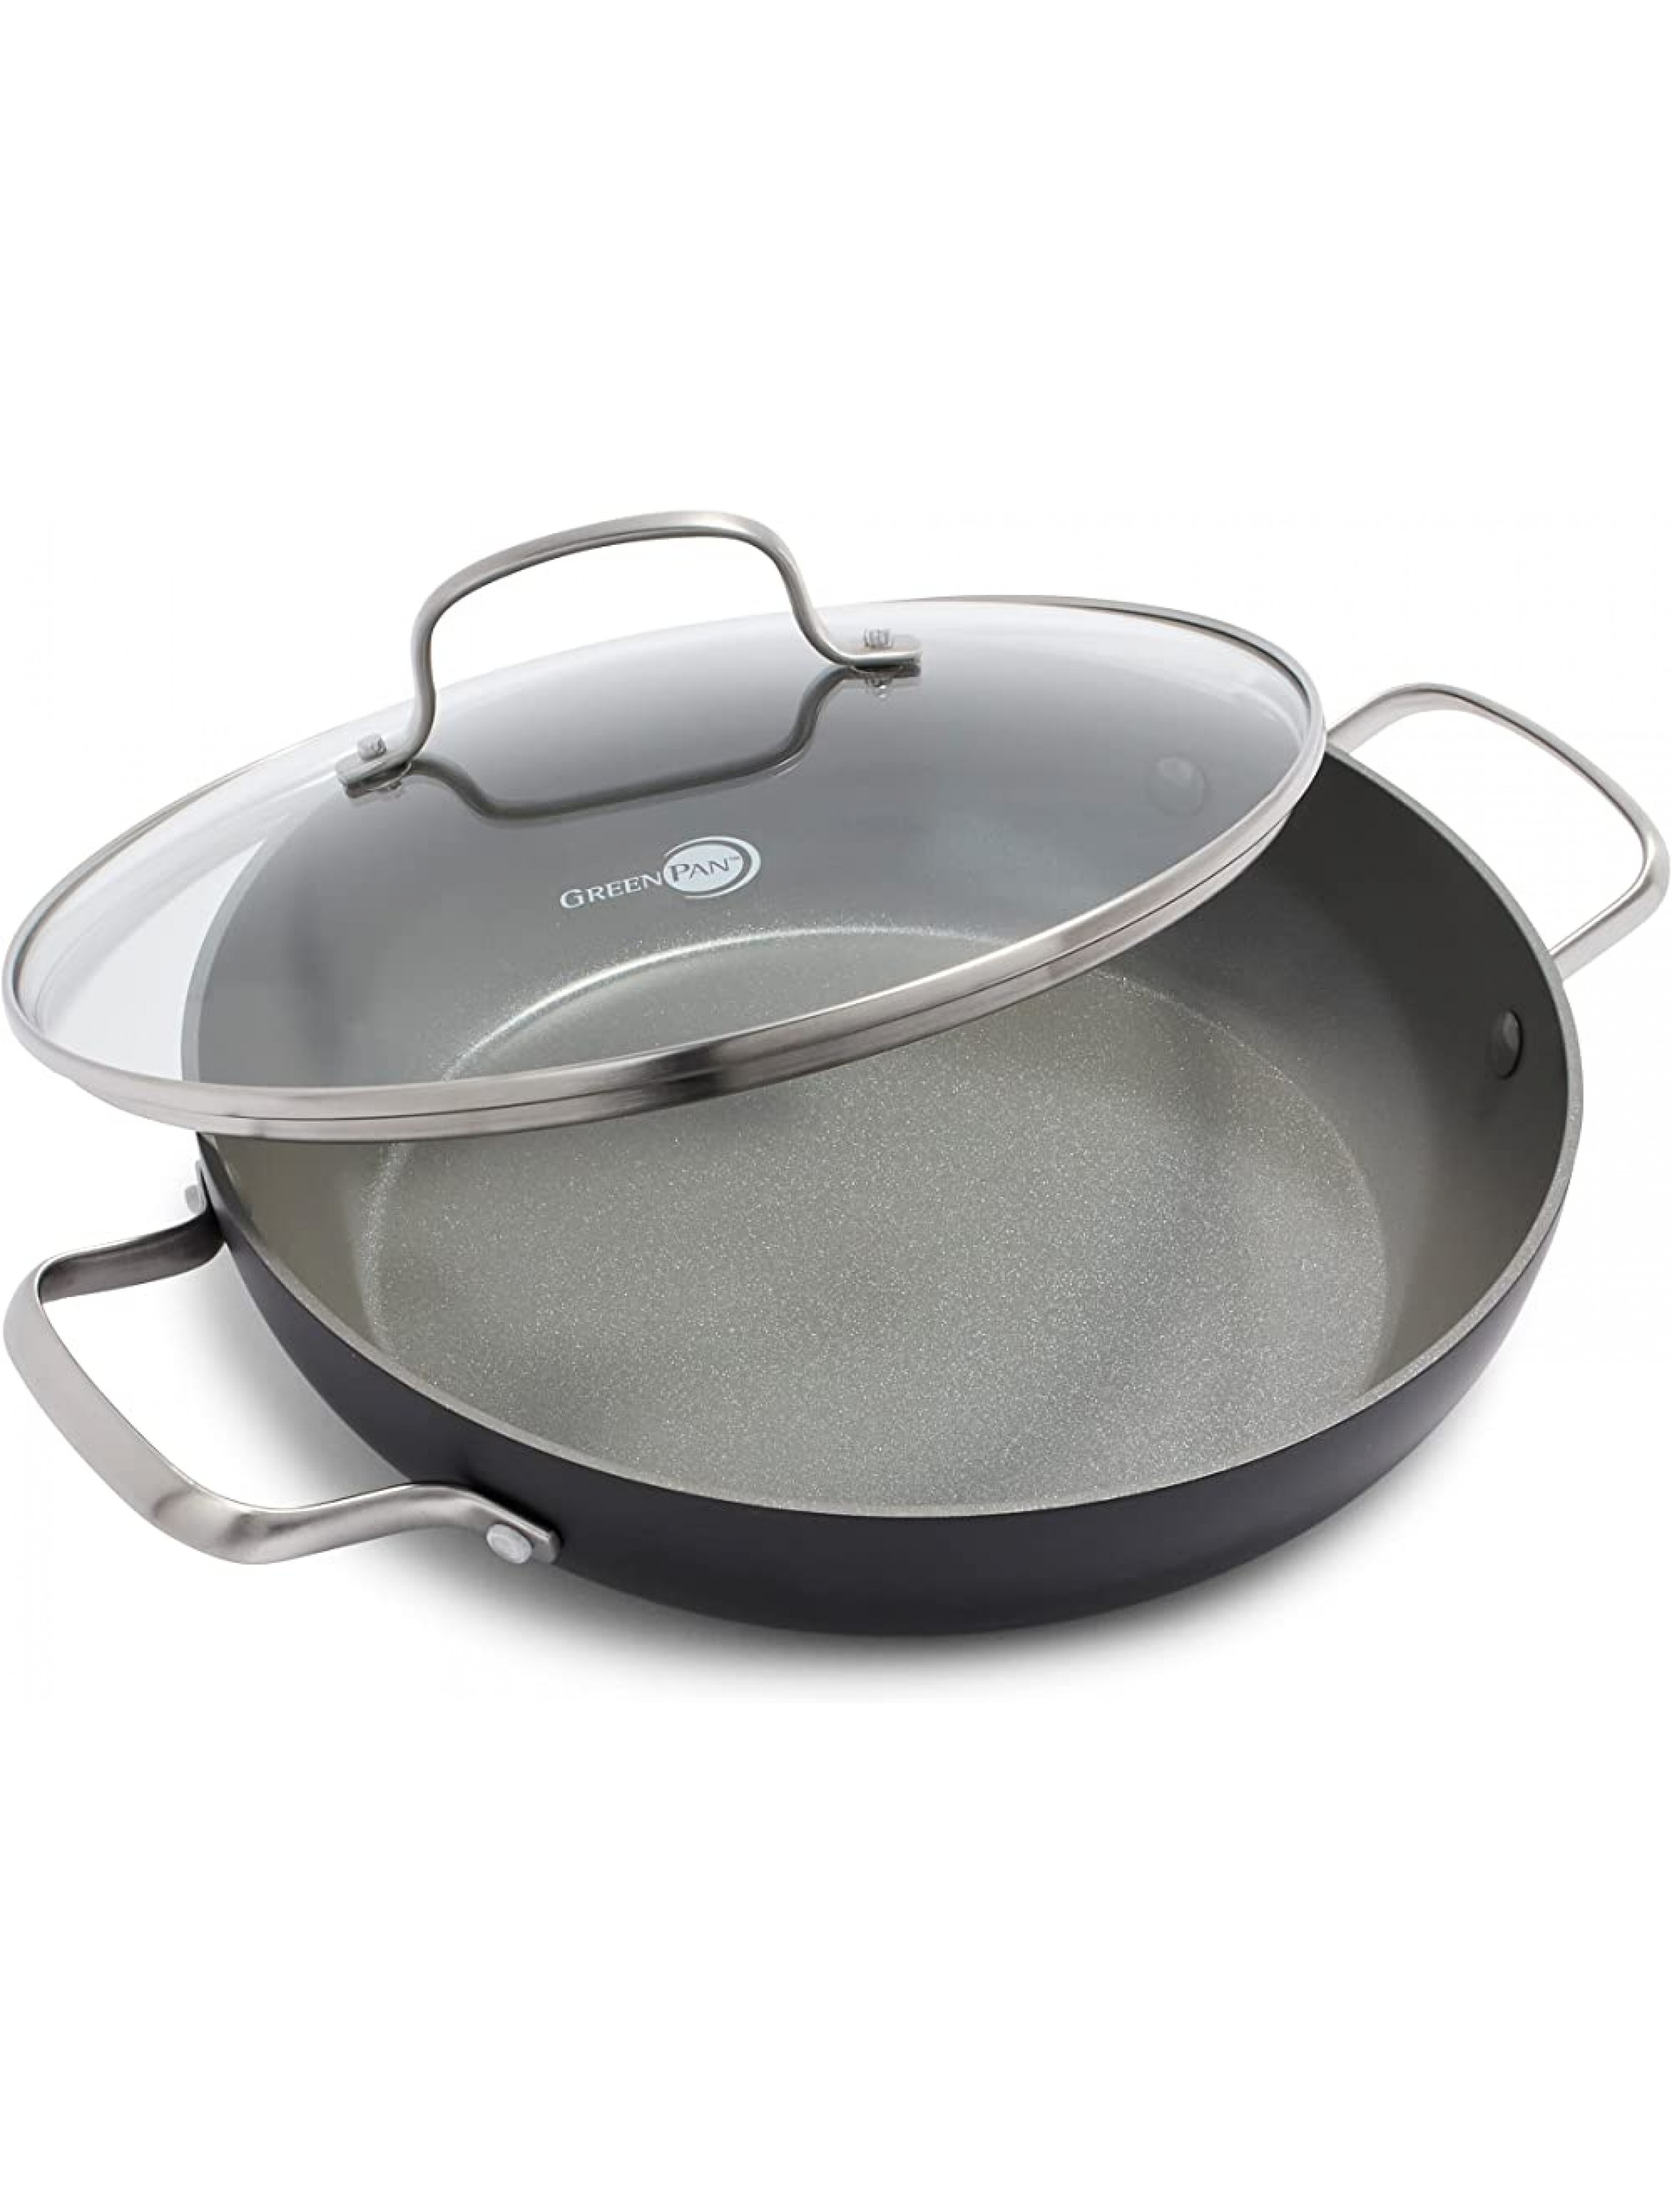 GreenPan Chatham Hard Anodized Healthy Ceramic Nonstick 11 Everyday Frying Pan Skillet with 2 Handles and Lid PFAS-Free Dishwasher Safe Oven Safe Gray - B7J131AND